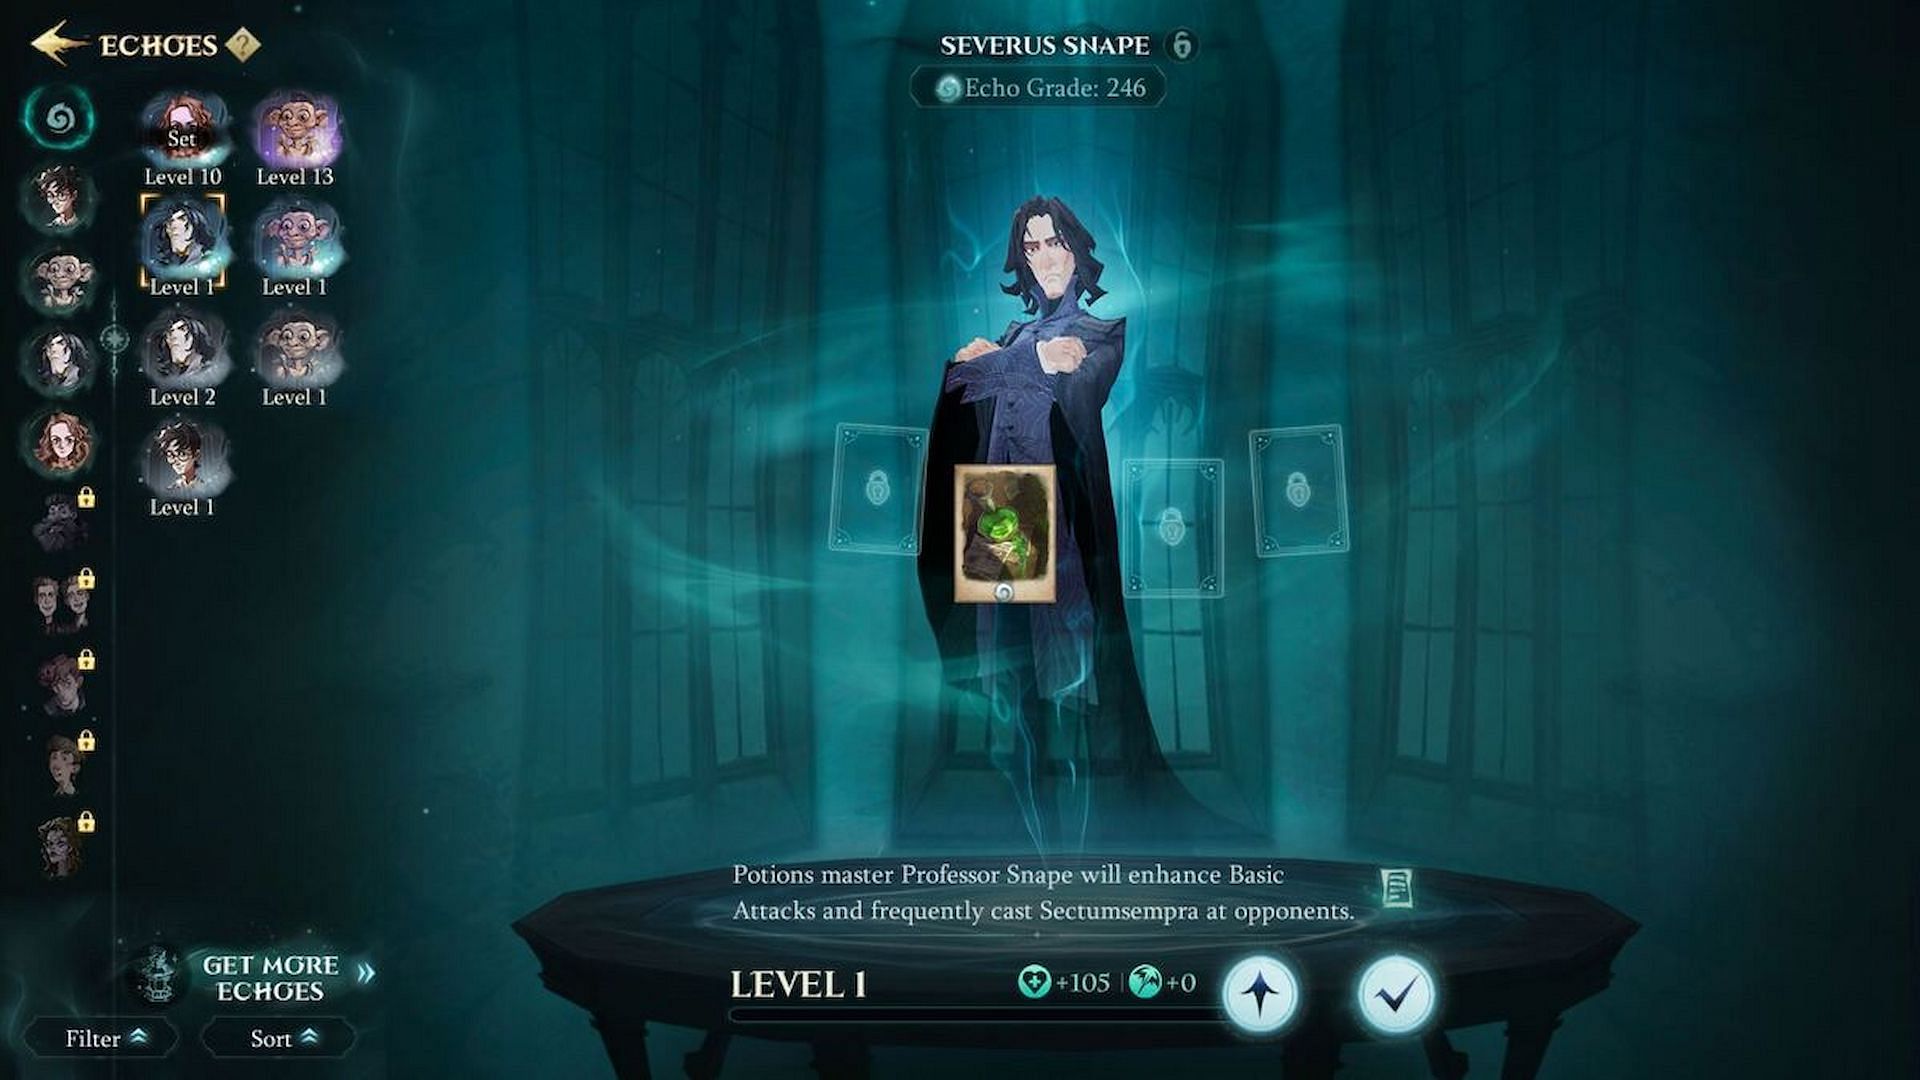 Echo of Severus Snape is one of the top-tier Echoes (Image via Harry Potter Magic Awakened)